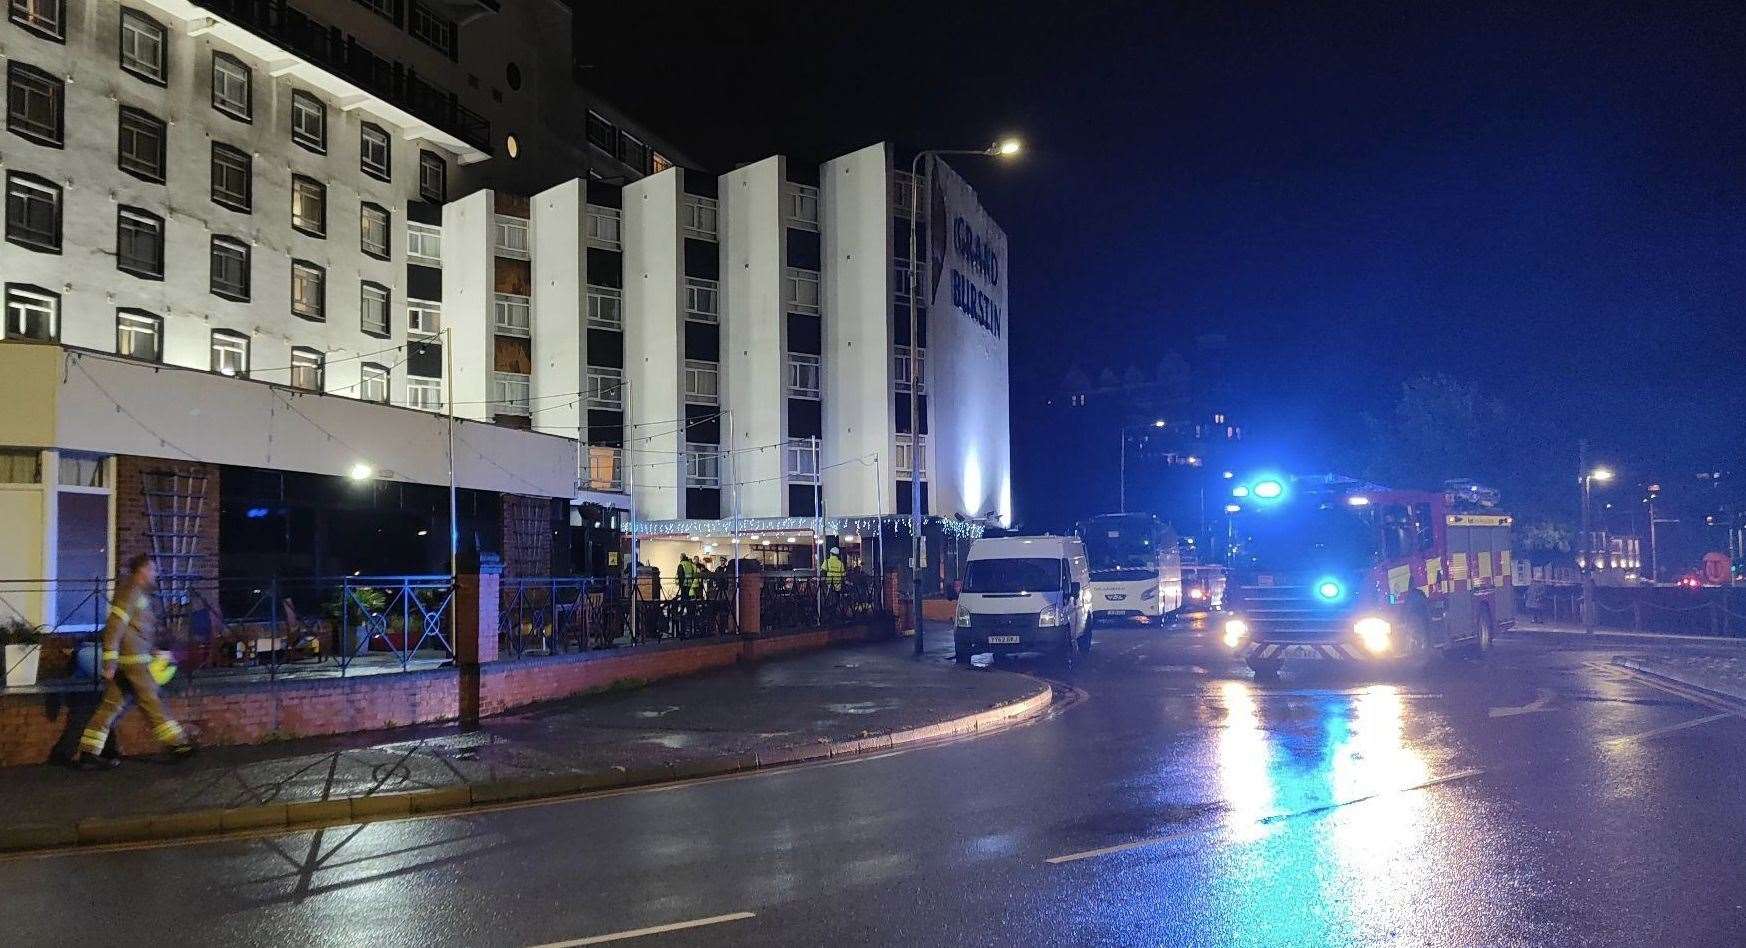 Part of the front of the Grand Burstin Hotel in Folkestone has fallen into the street. Picture: Steve Wood